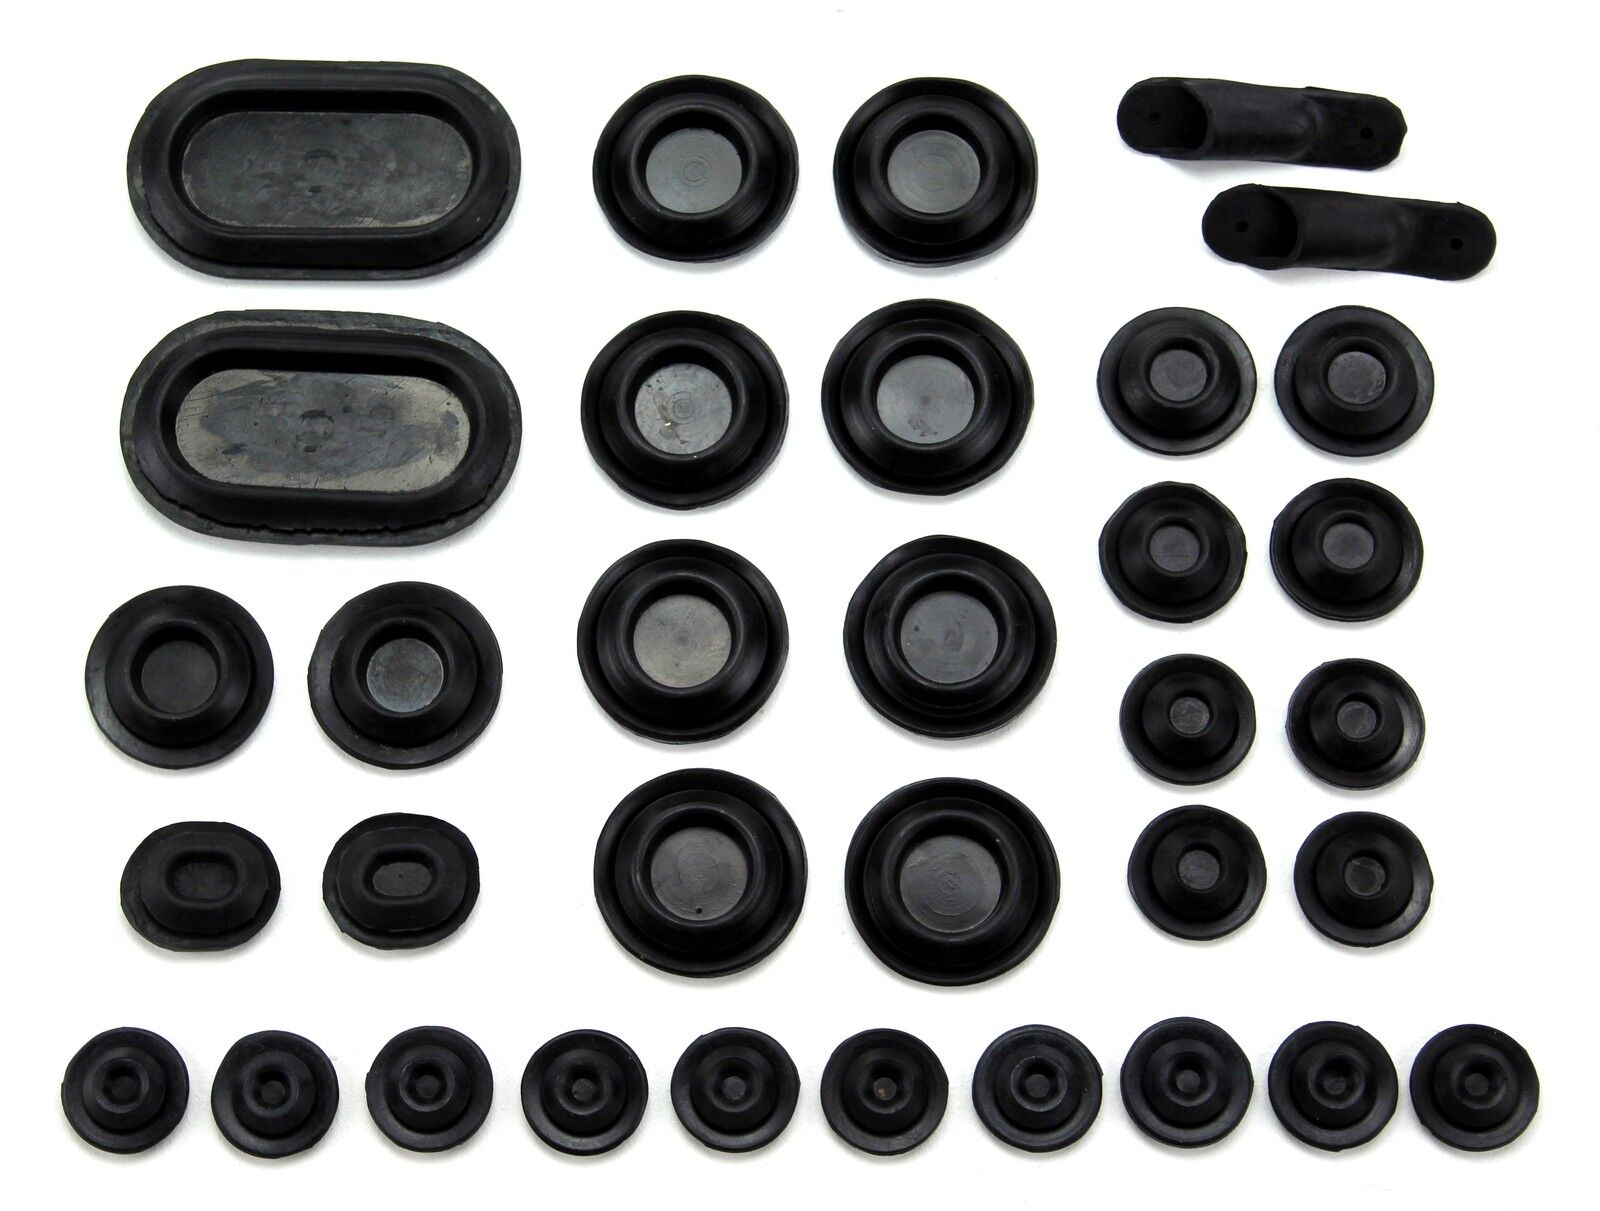 Mustang Rubber Body Plug 34 Piece Master Kit 1964 1965 1966 -Floors Cowl Trunk